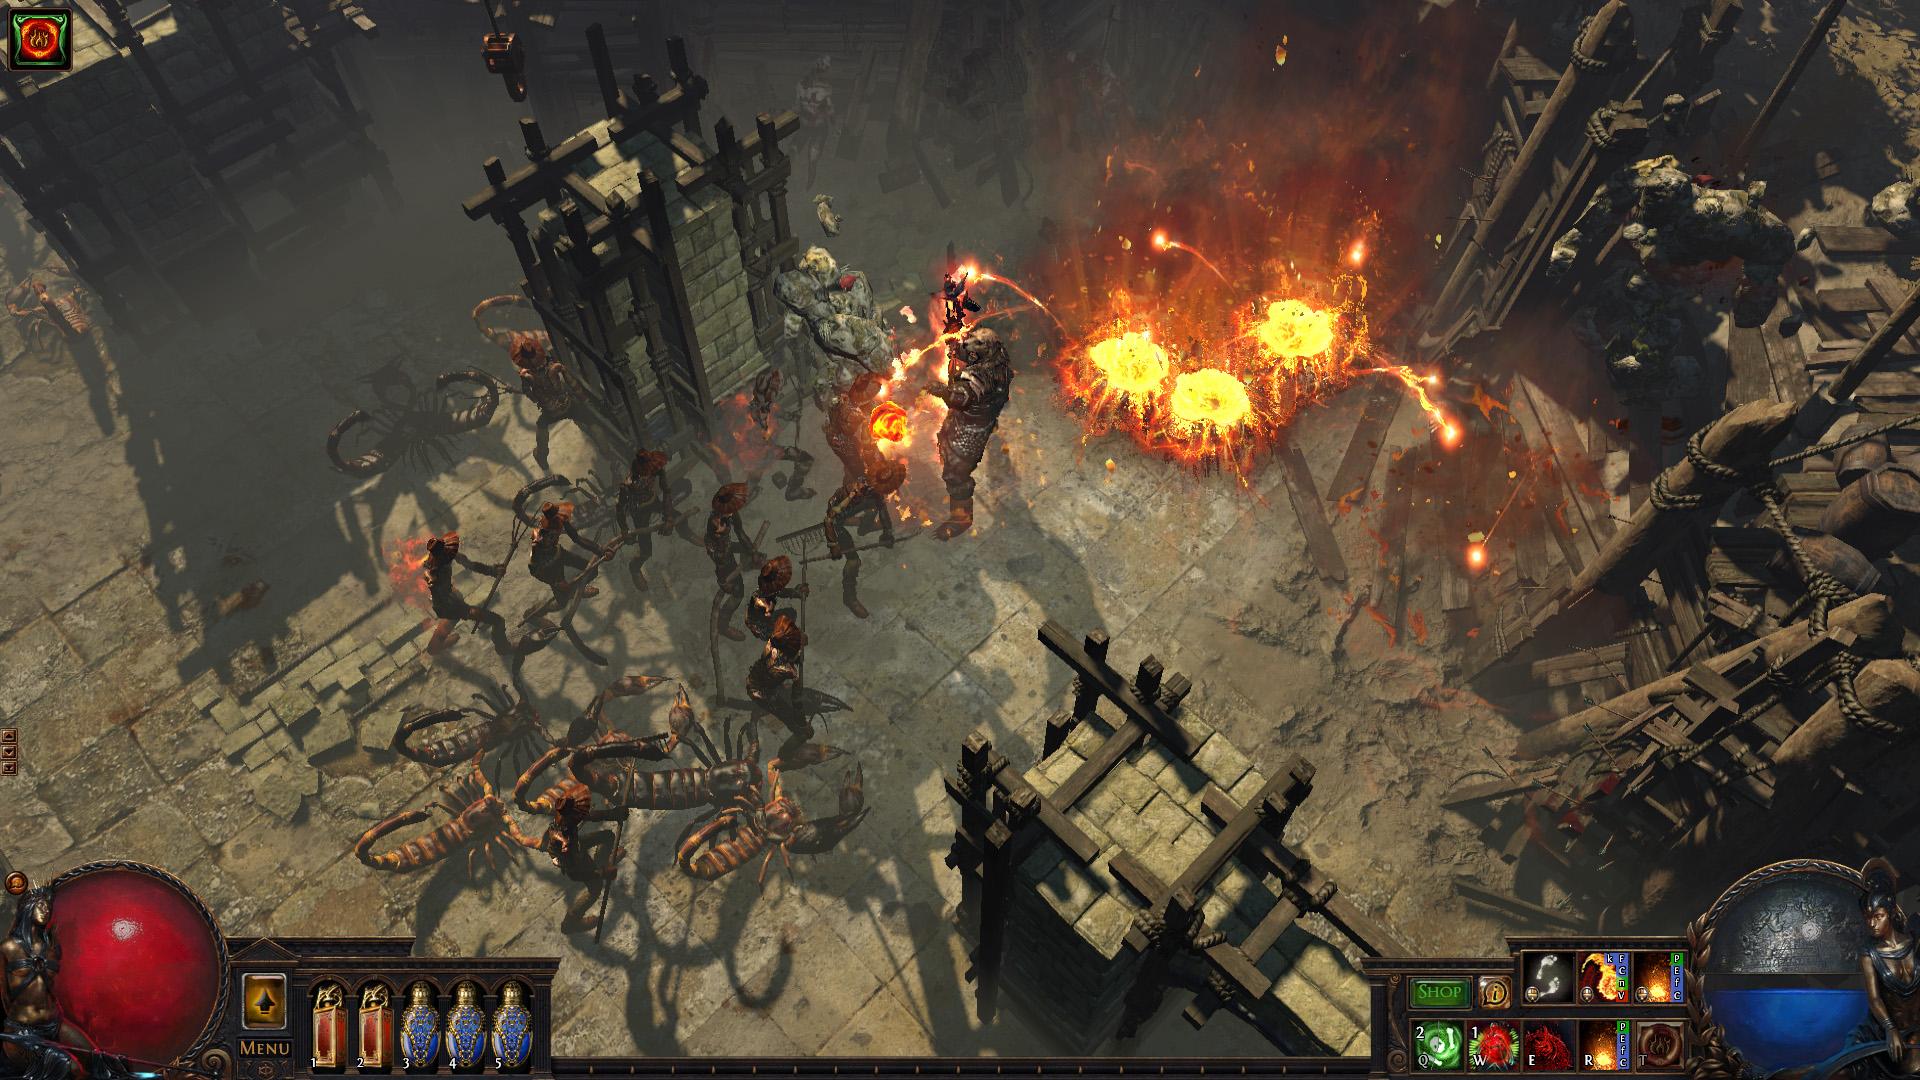 Screenshot №52 from game Path of Exile